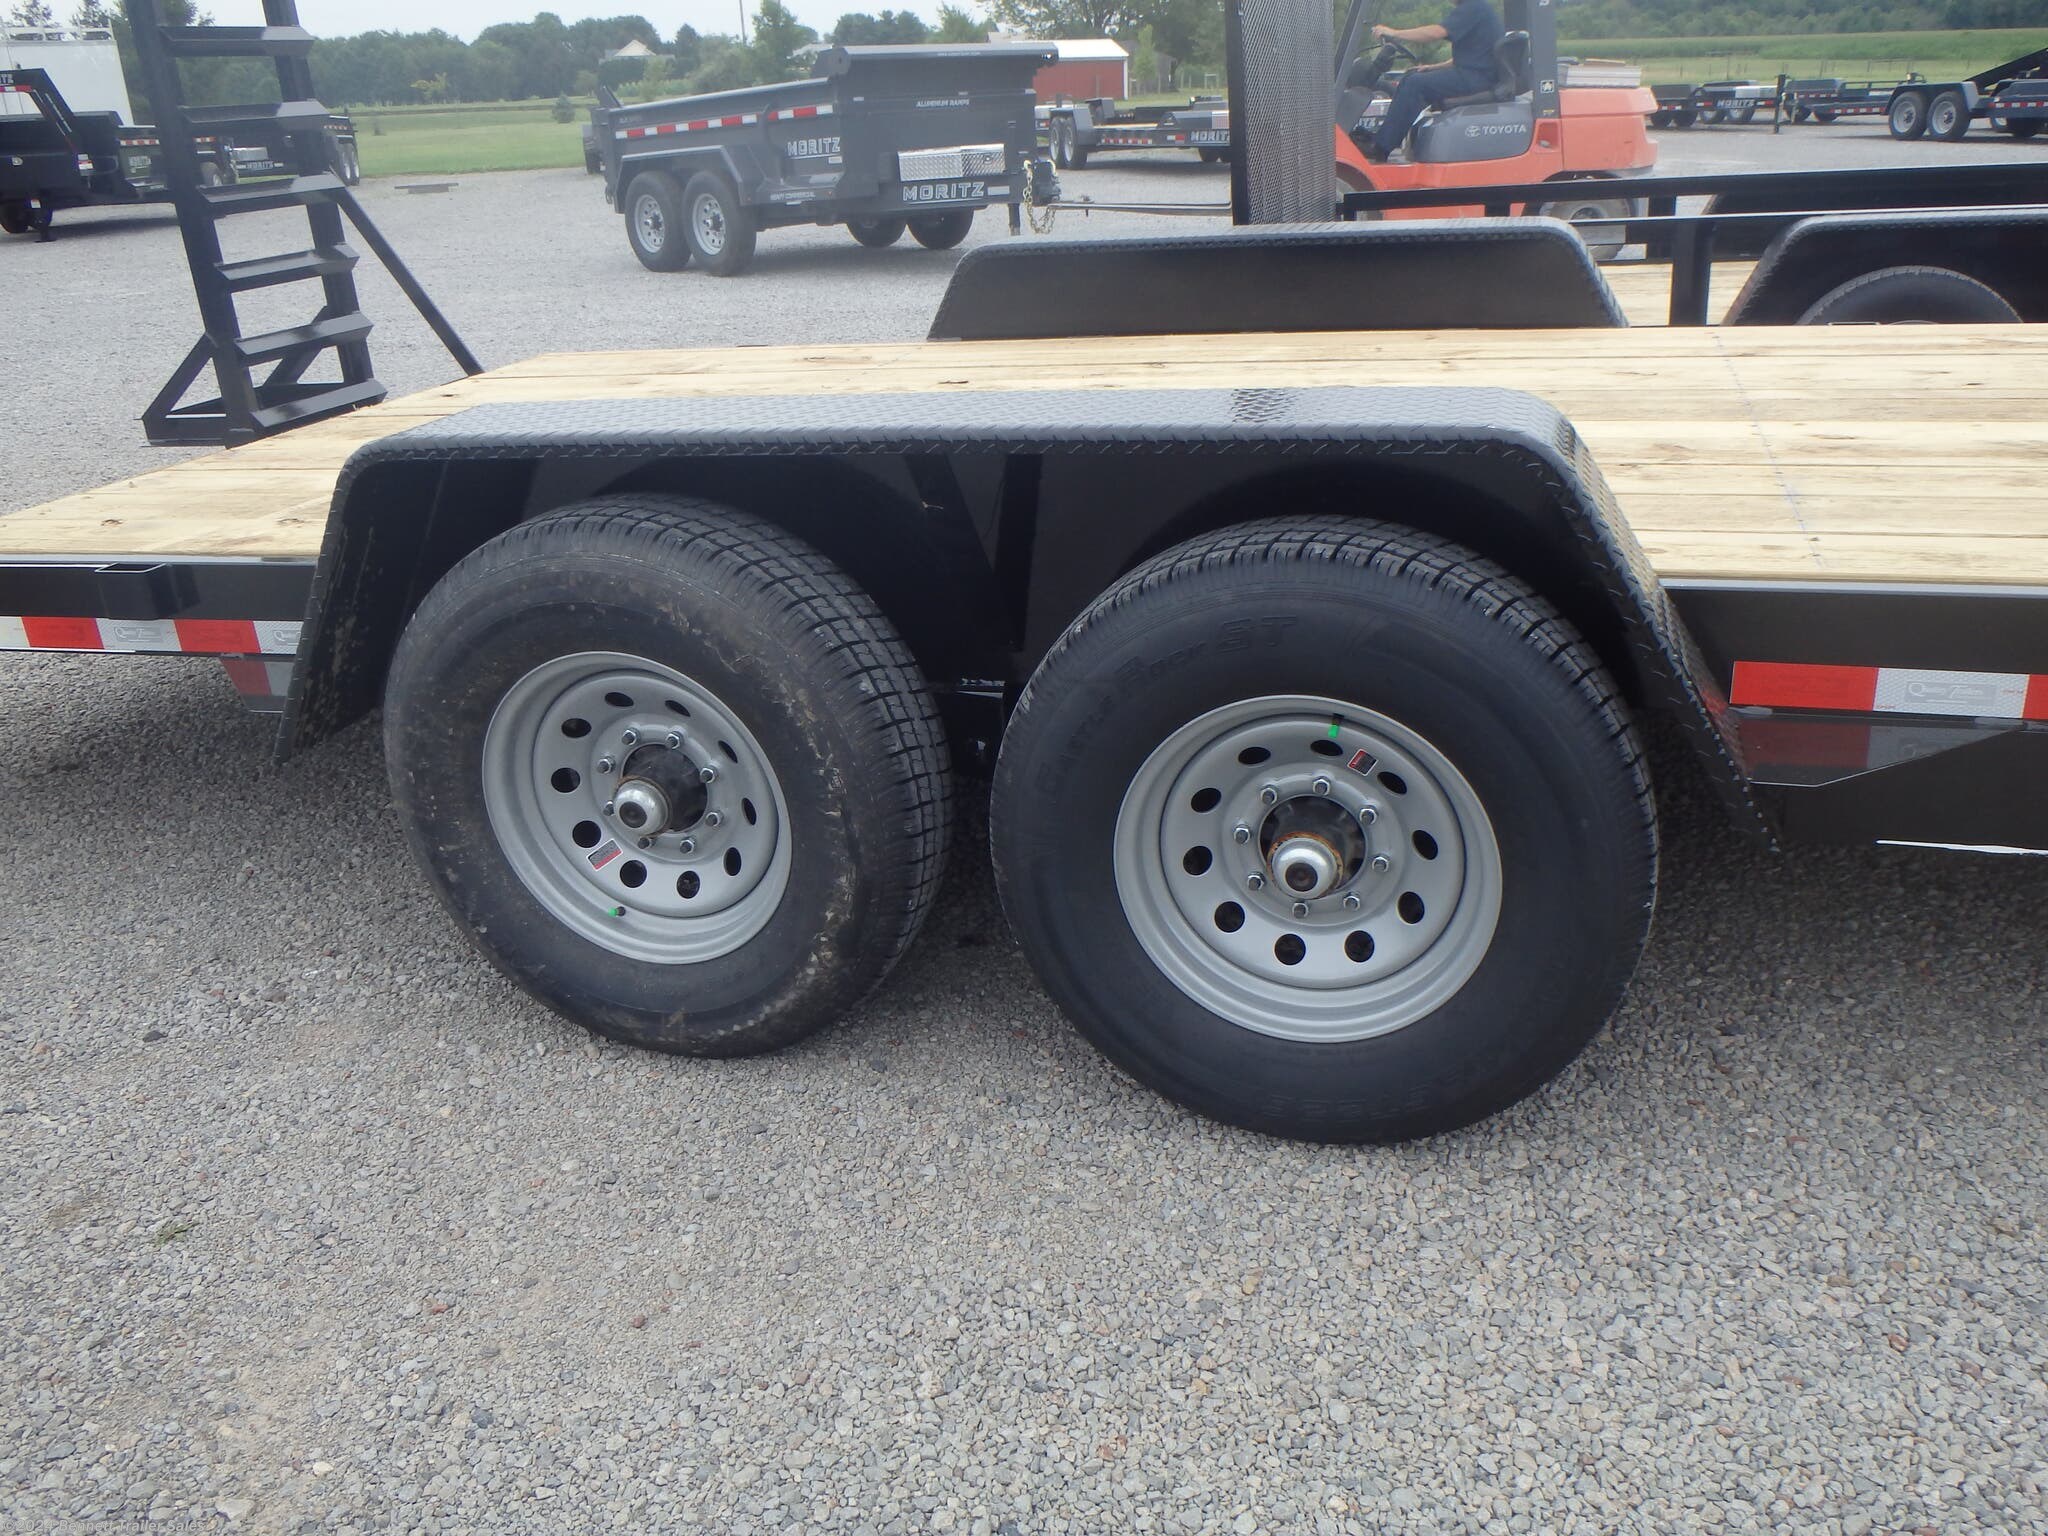 These are the wheels the trailer is equipped with.